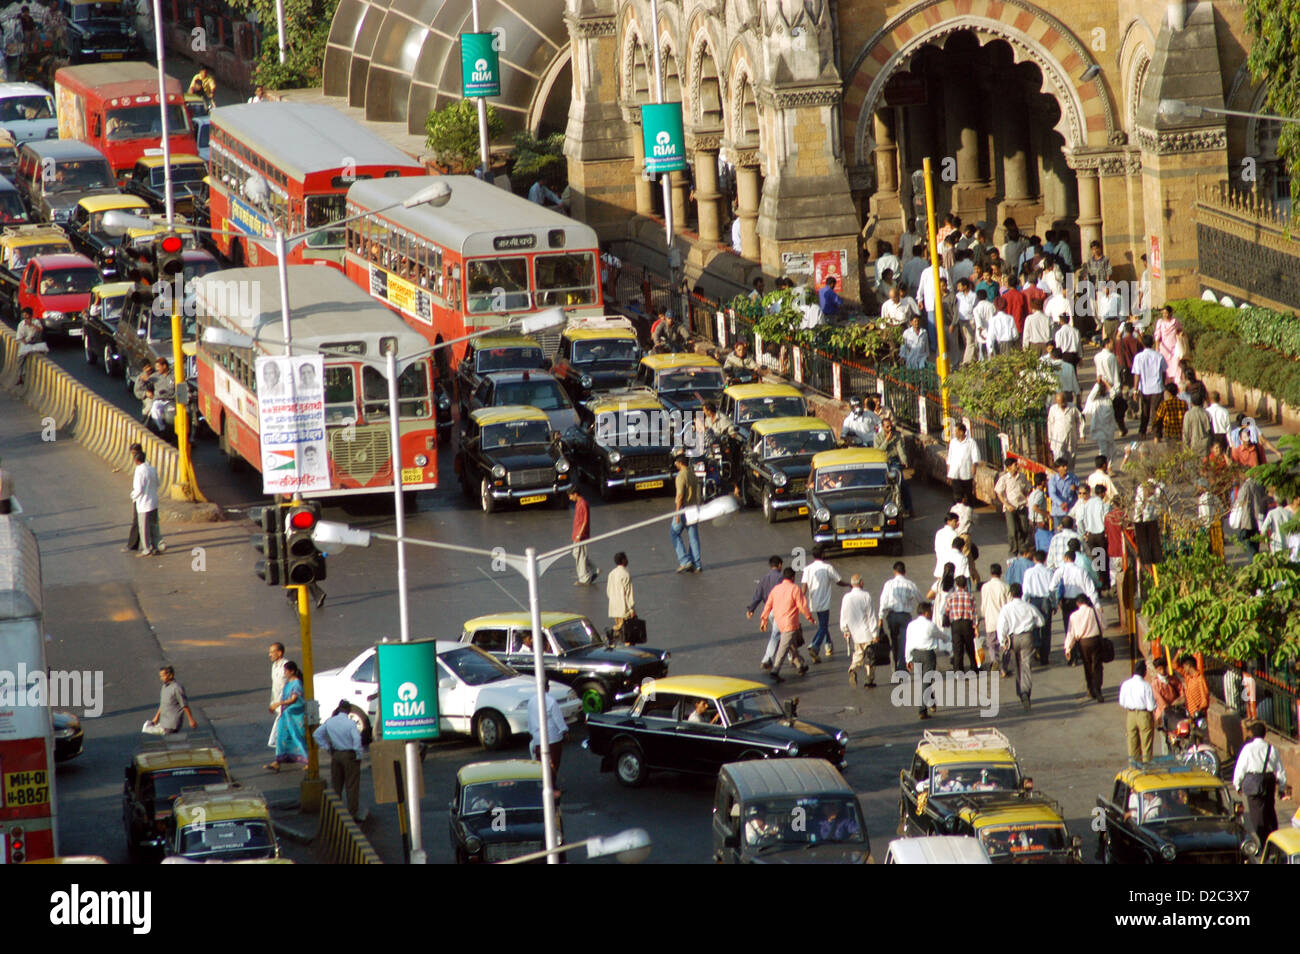 Red Colored Best Buses Bombay Electric Suburban Transport Traffic Outside Vt Railway Station Victoria Terminus Now Renamed As Stock Photo